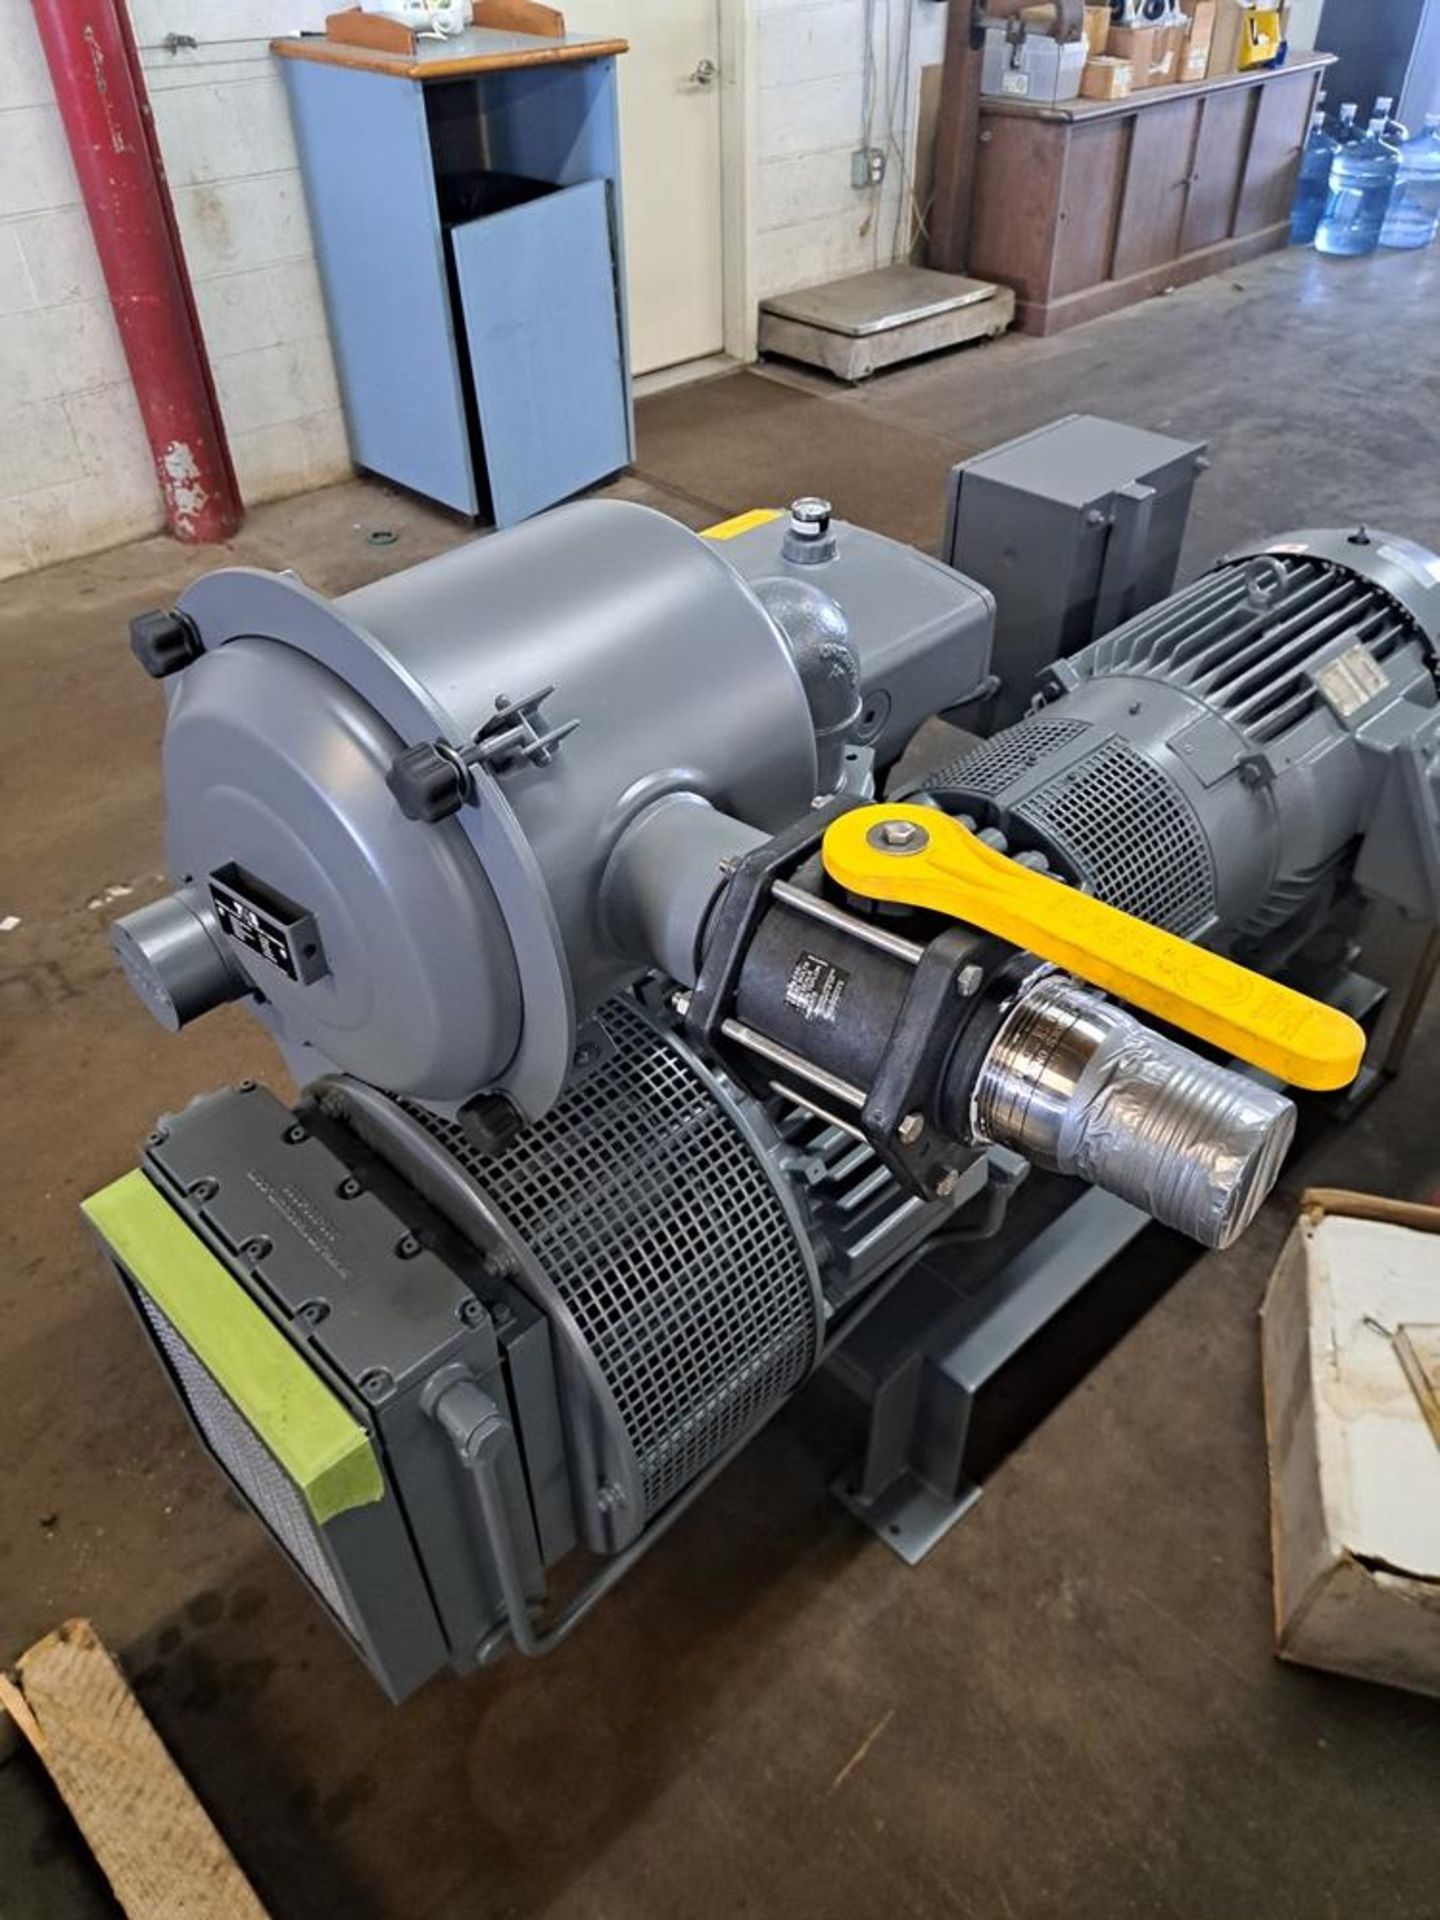 TMS Mdl. RVO630 Vacuum Pump (New Condition),25 h.p., 190/380 volts, 50 Hz, 230/460 volts, 3 phase, - Image 4 of 8